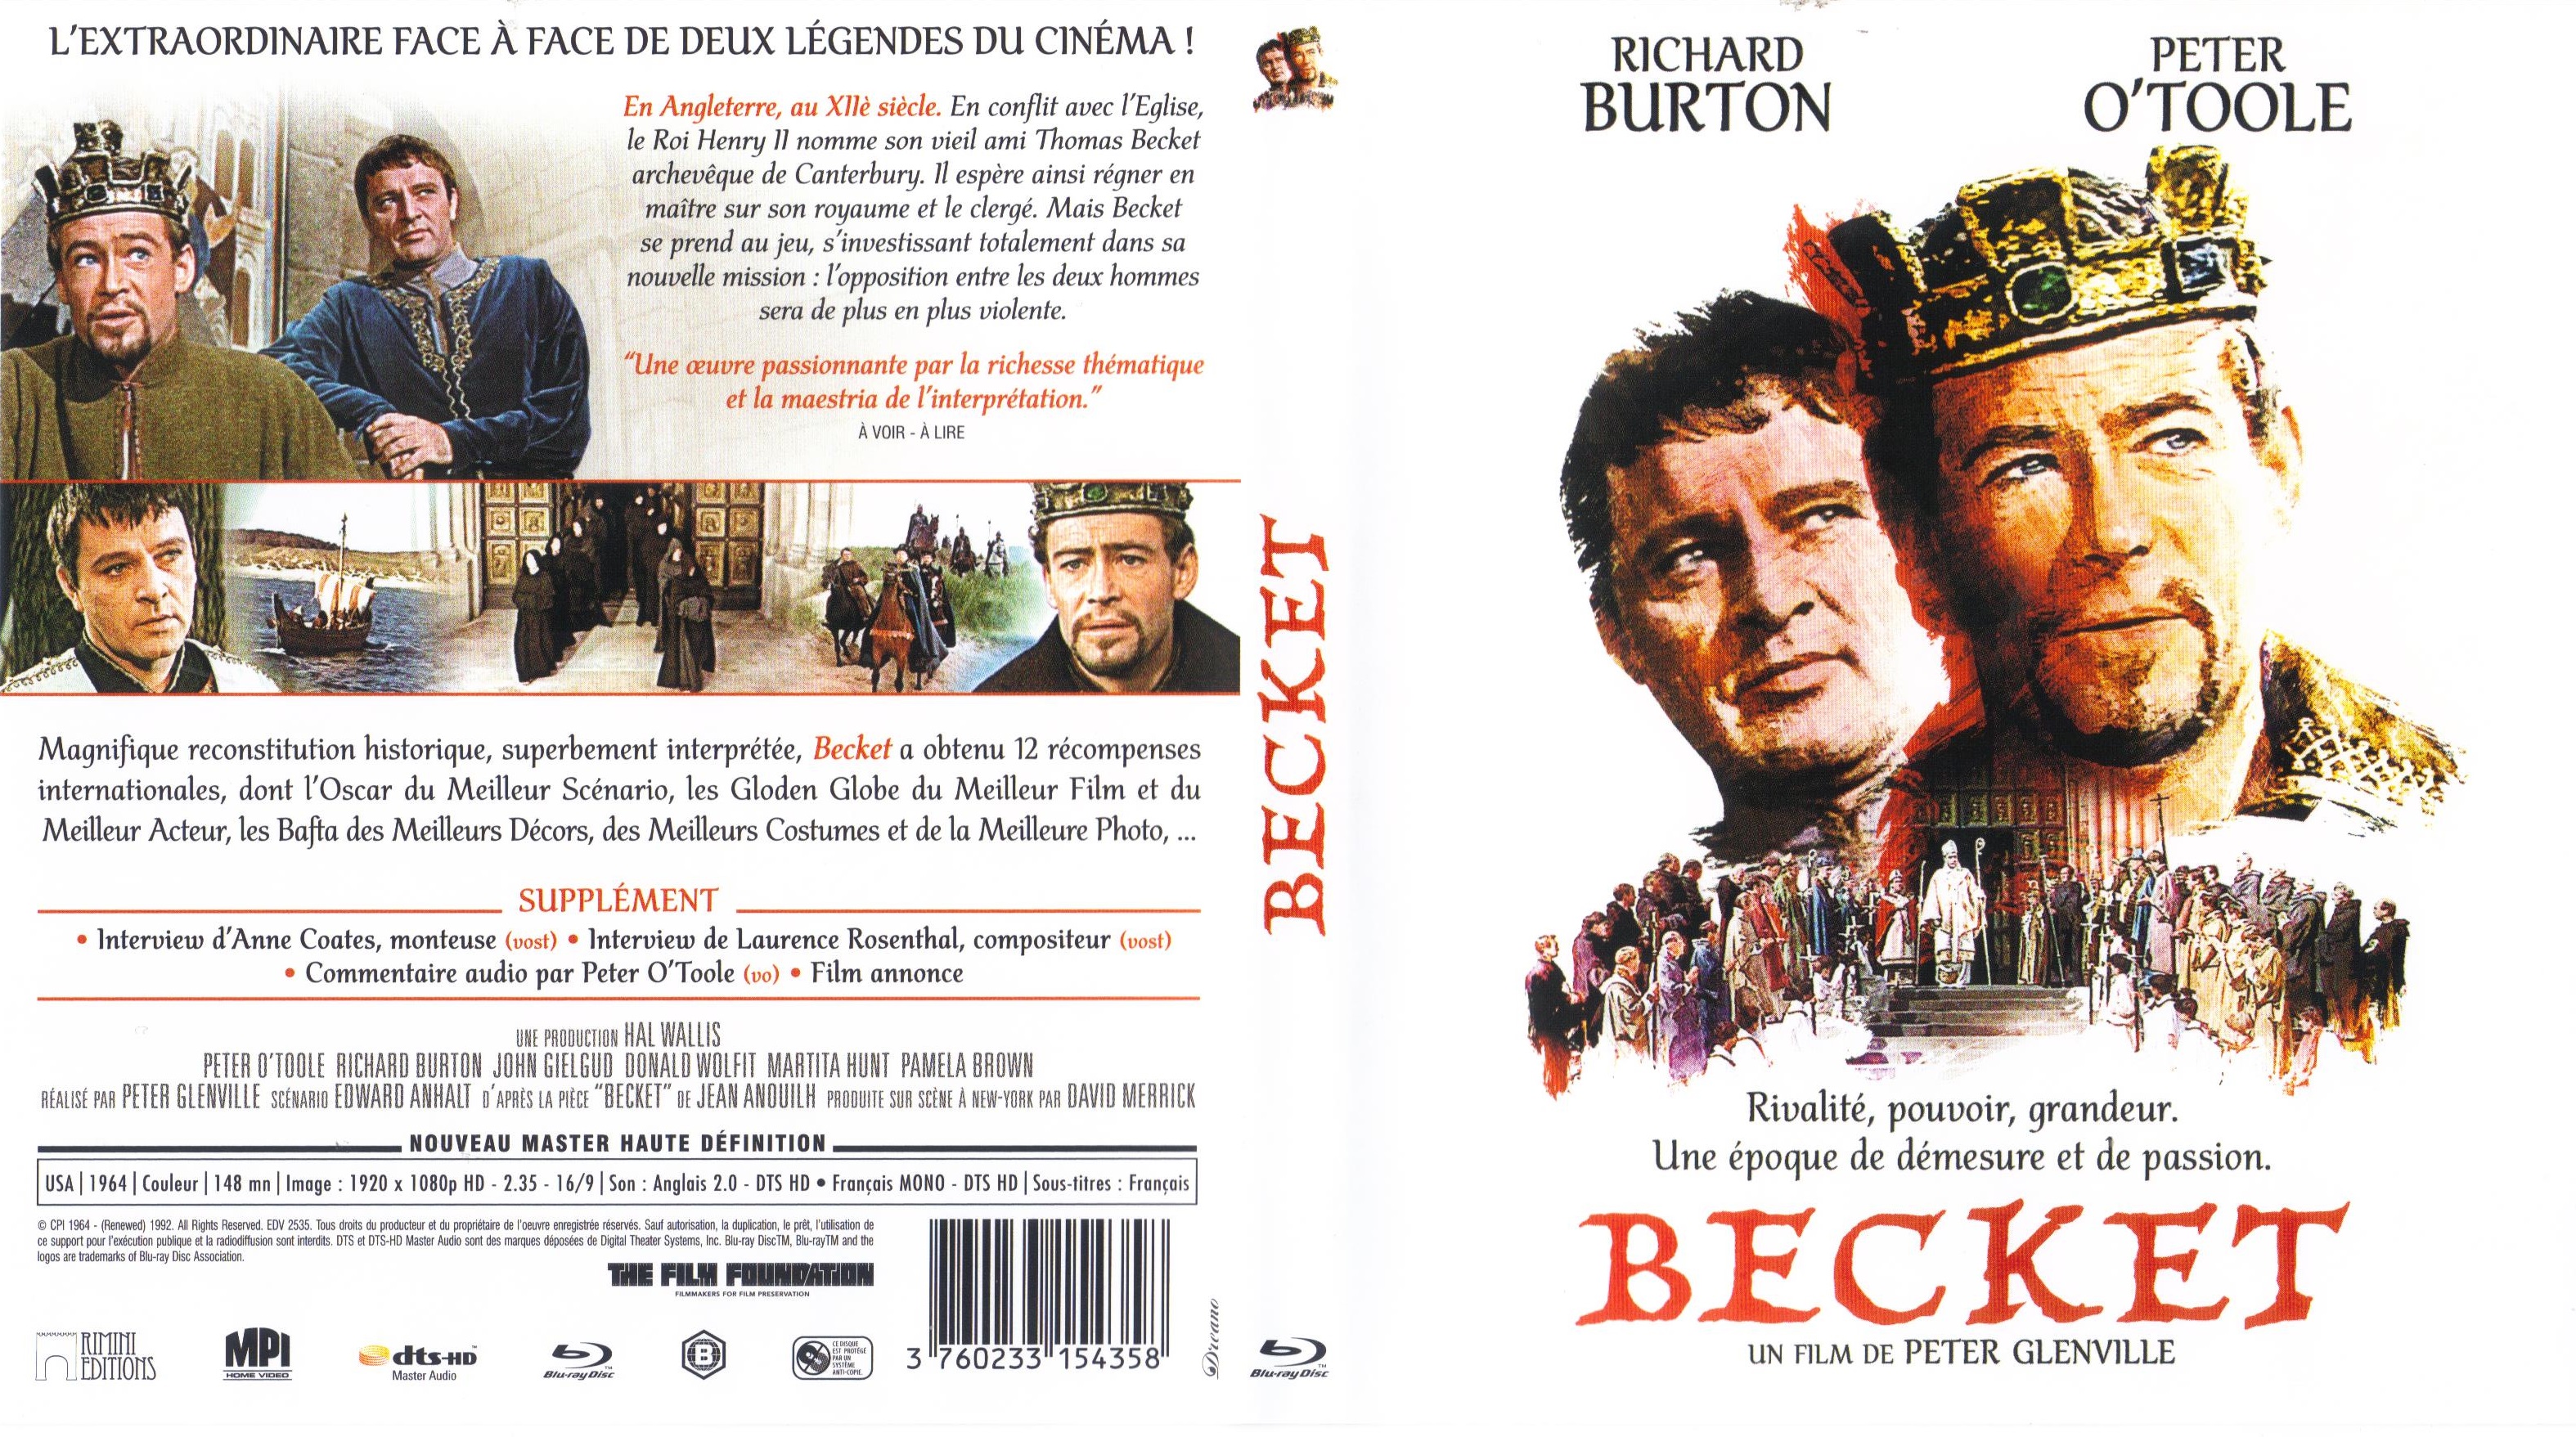 Jaquette DVD Becket (BLU-RAY)